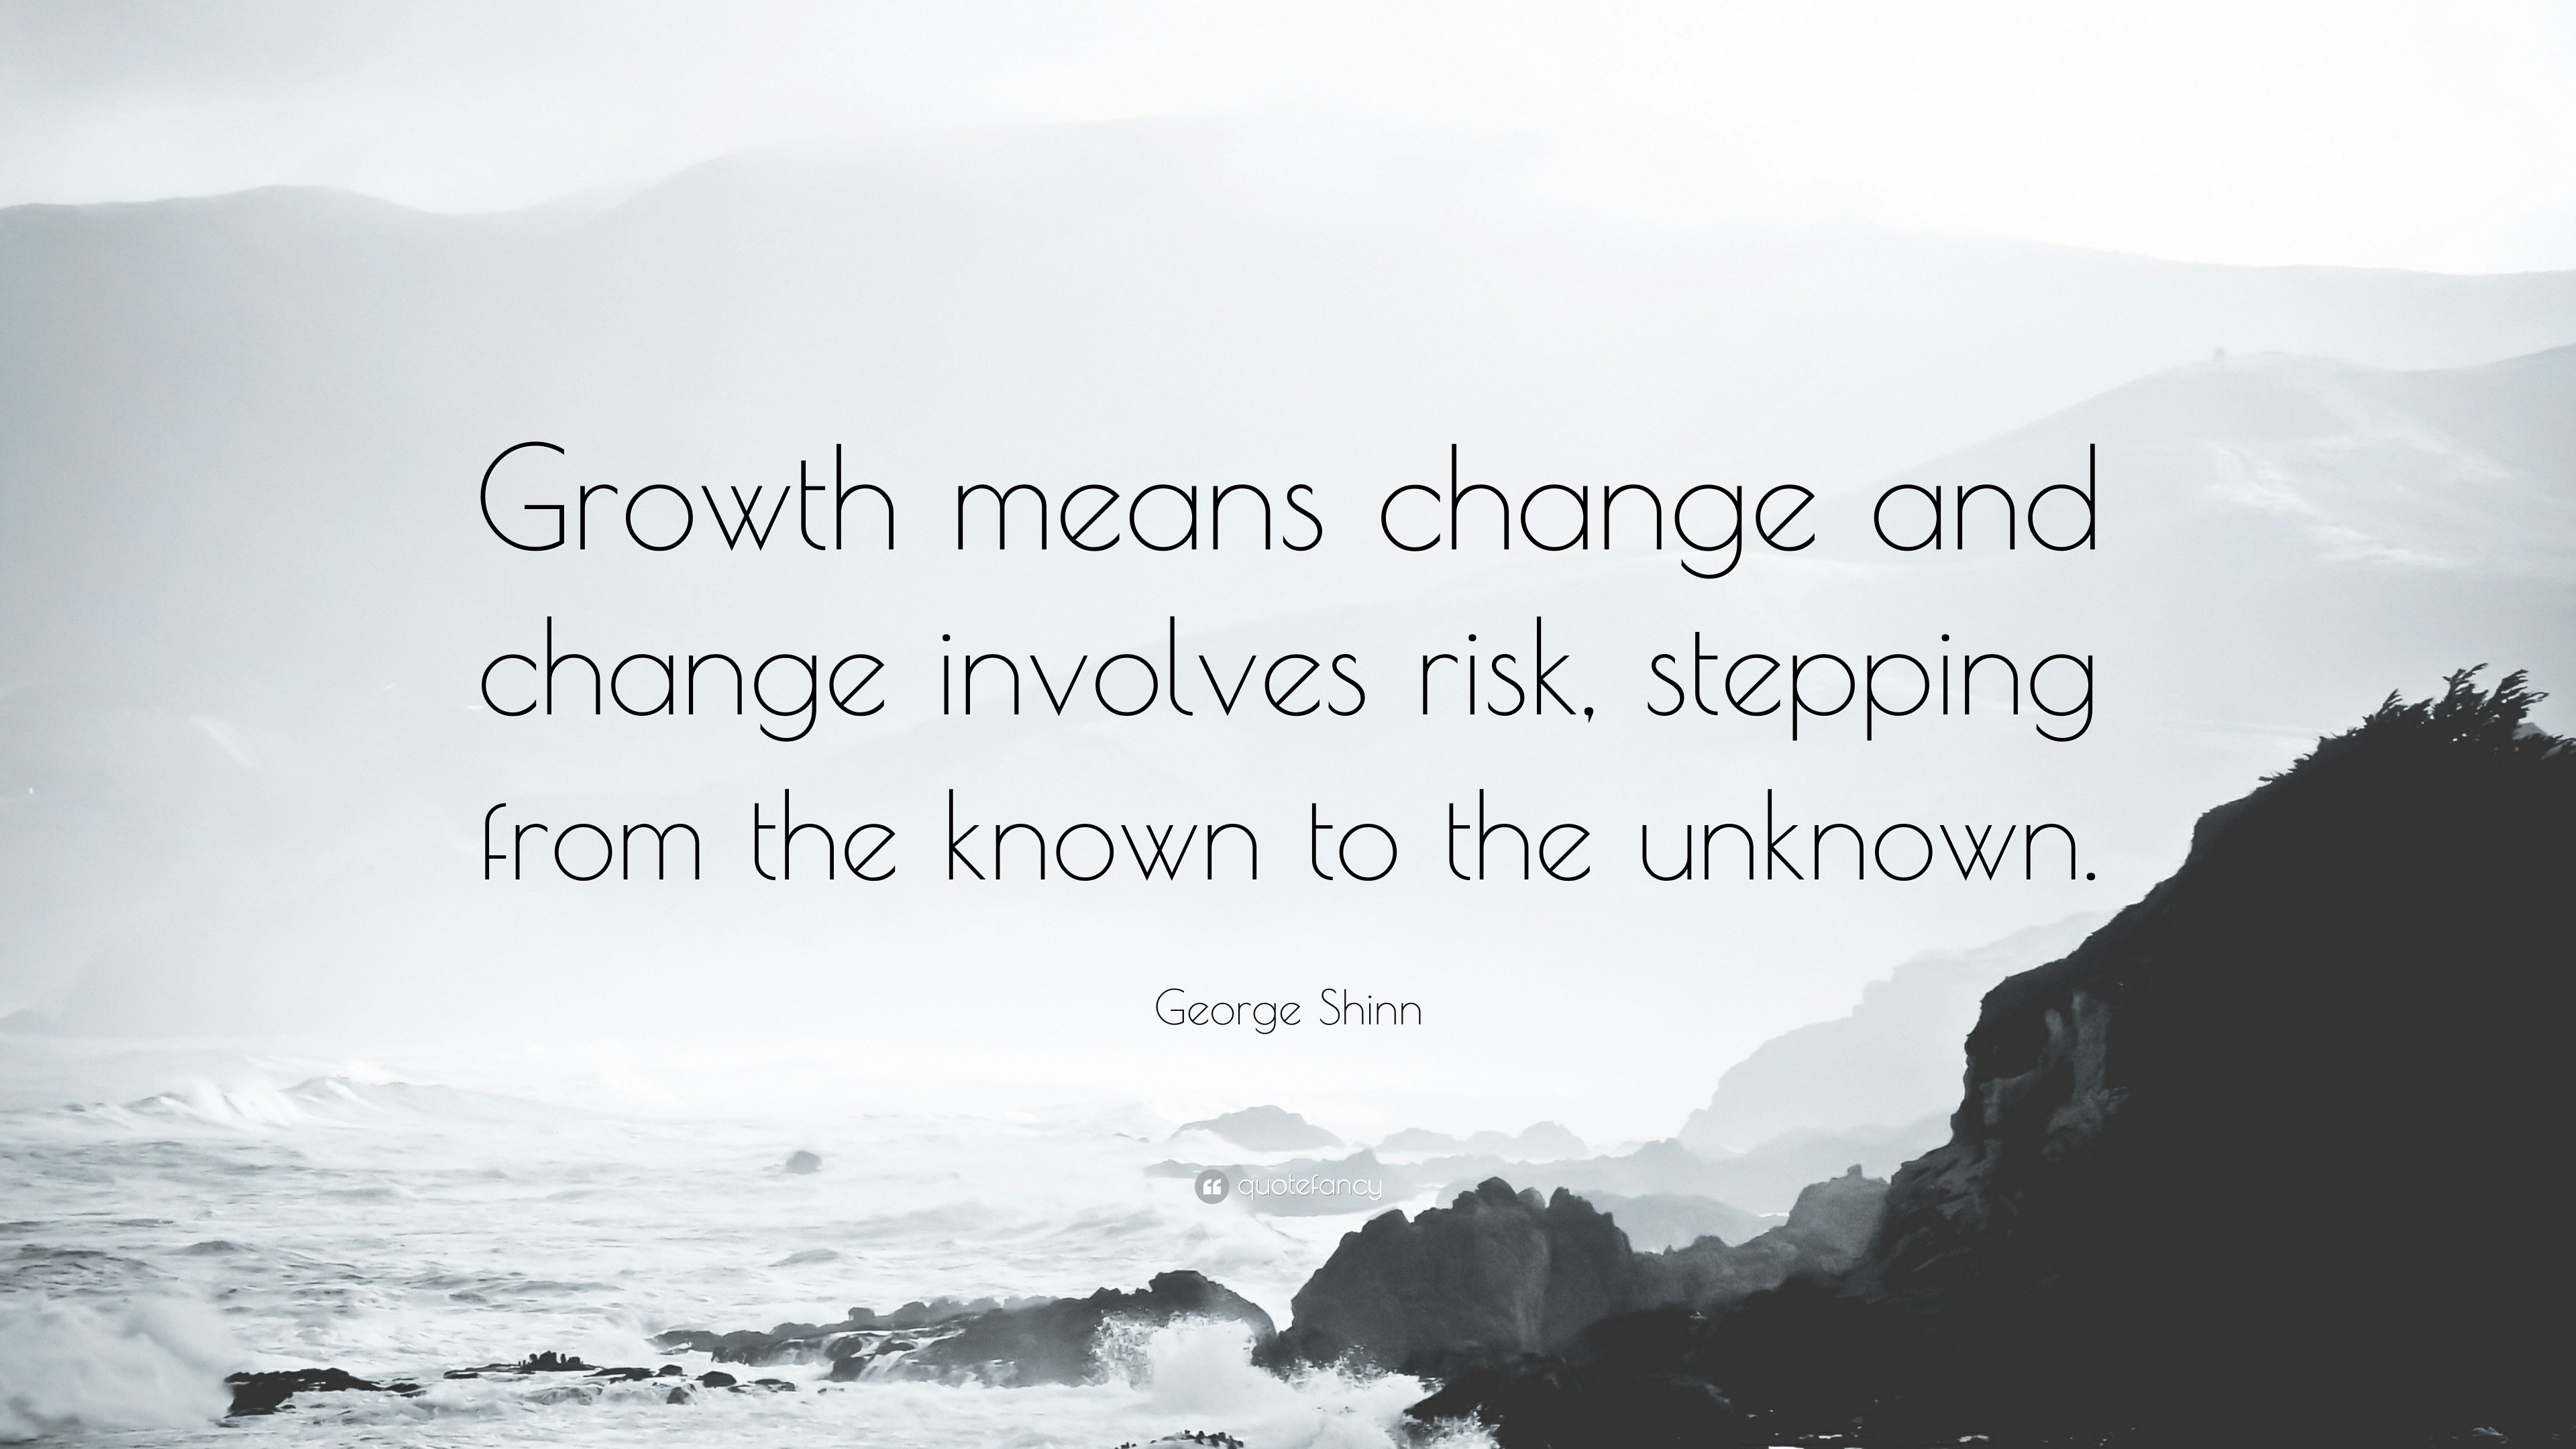 George Shinn Quote: “Growth means change and change involves risk